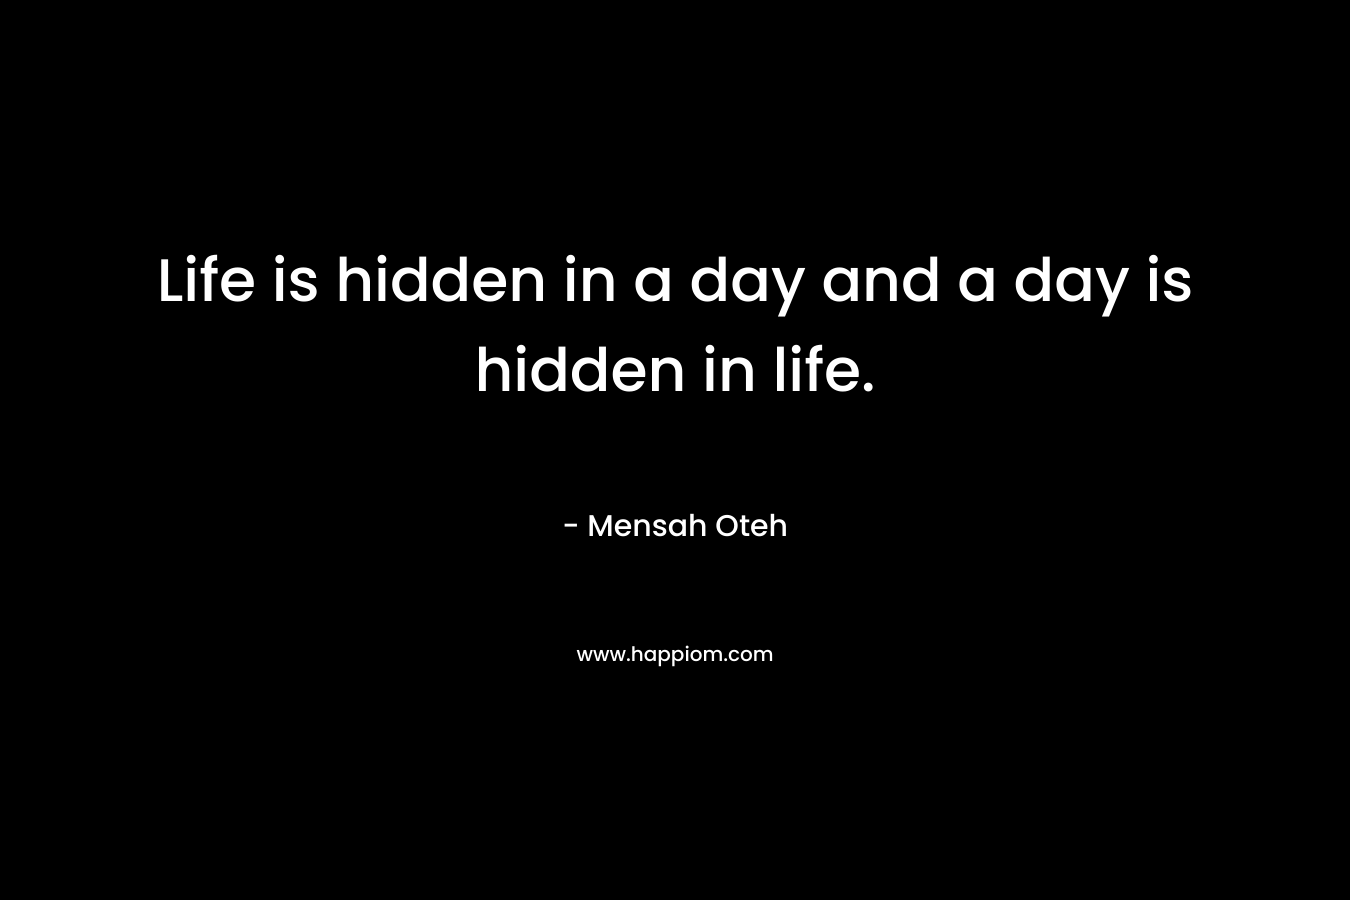 Life is hidden in a day and a day is hidden in life.